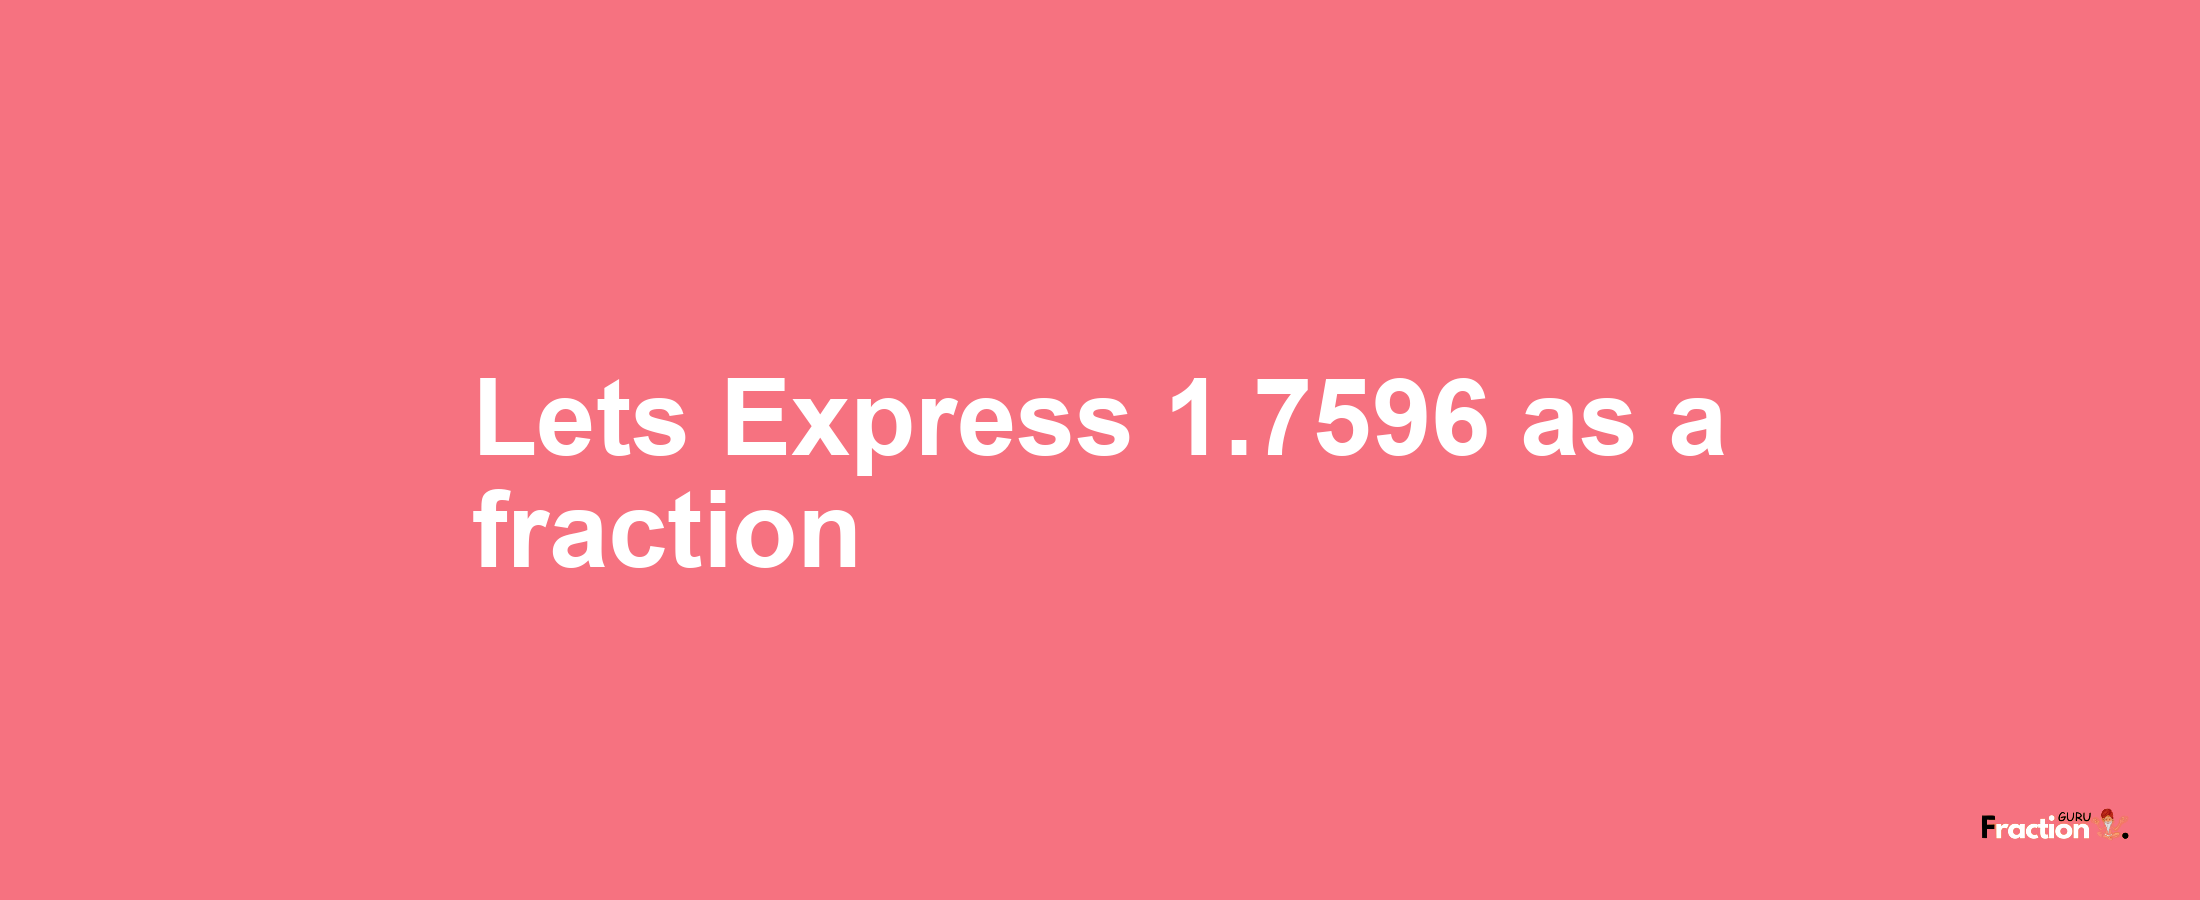 Lets Express 1.7596 as afraction